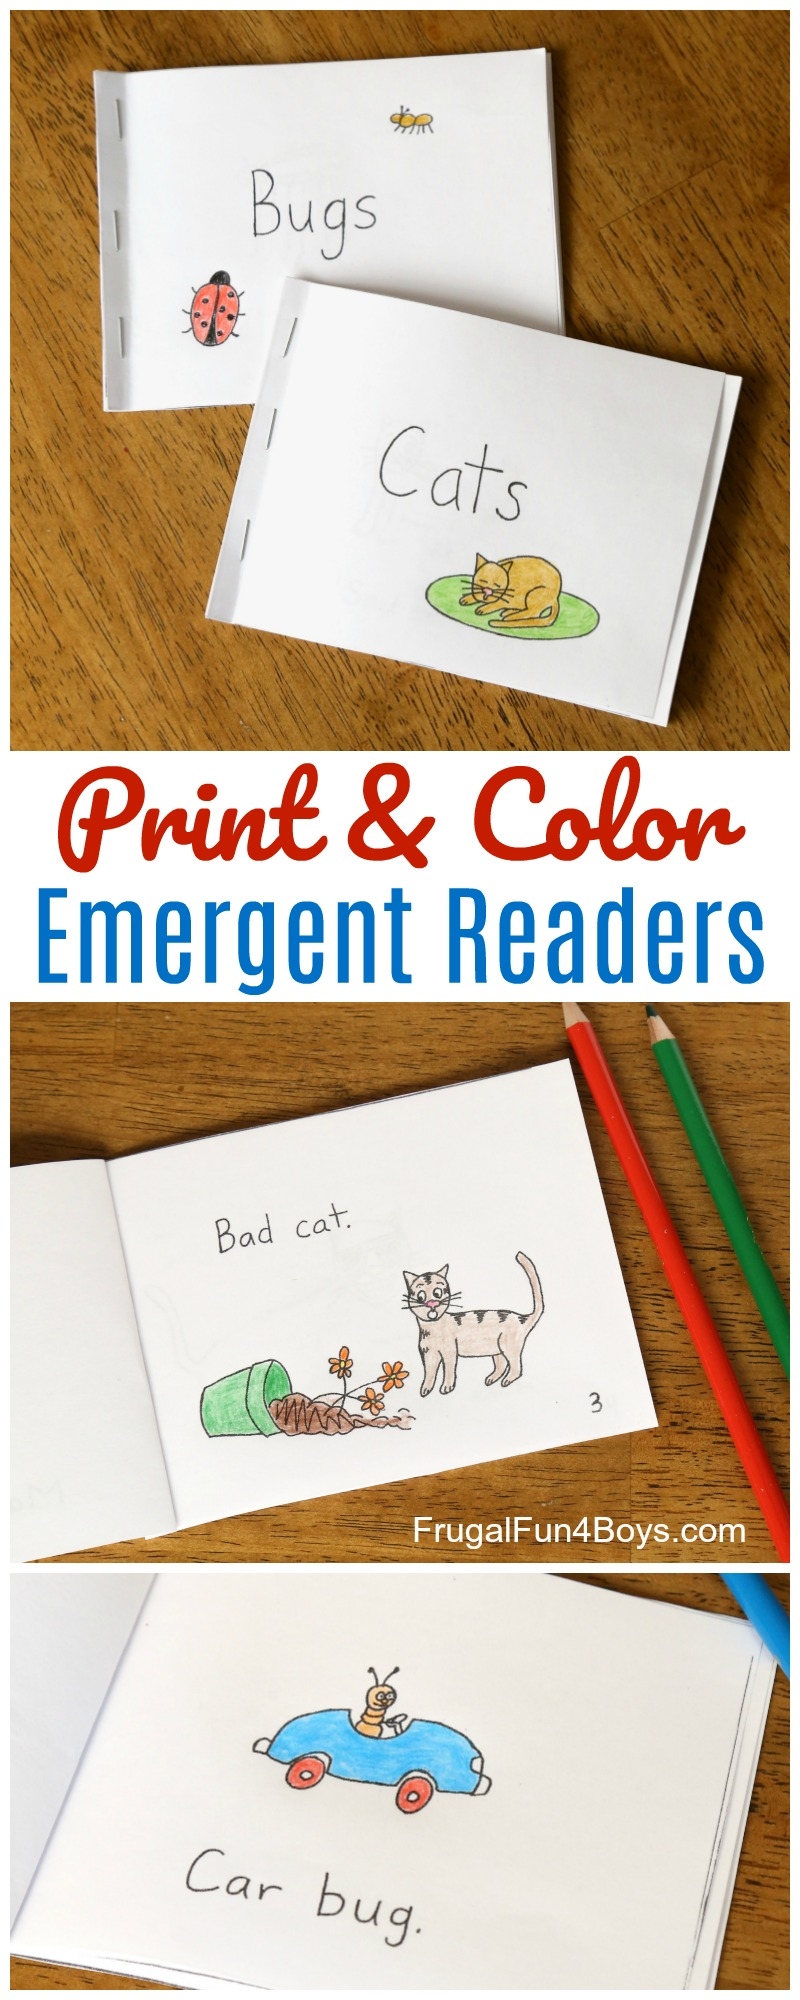 Free Printable Books For Beginning Readers Level 1 Easy Frugal Fun For Boys And Girls - Free Printable Books